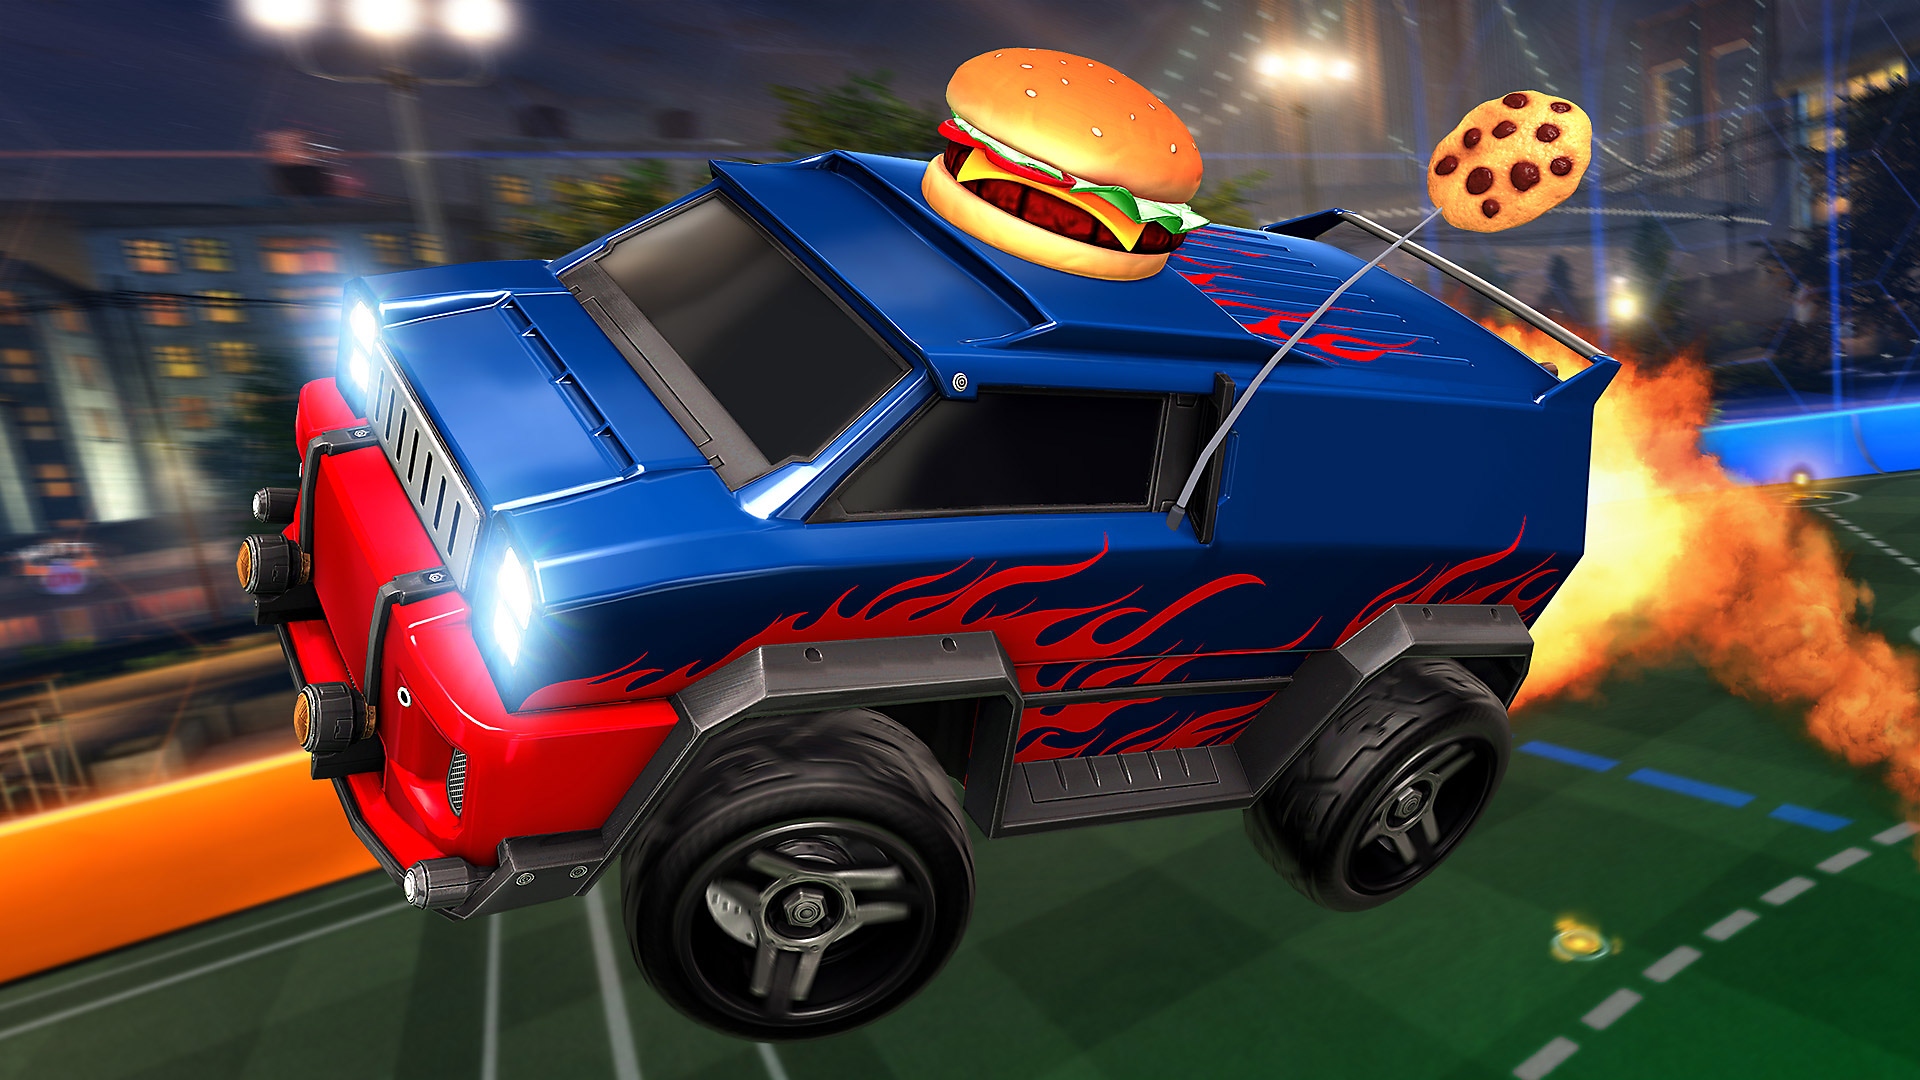 Rocket League screenshot showing a blue and red van with a novelty burger on top